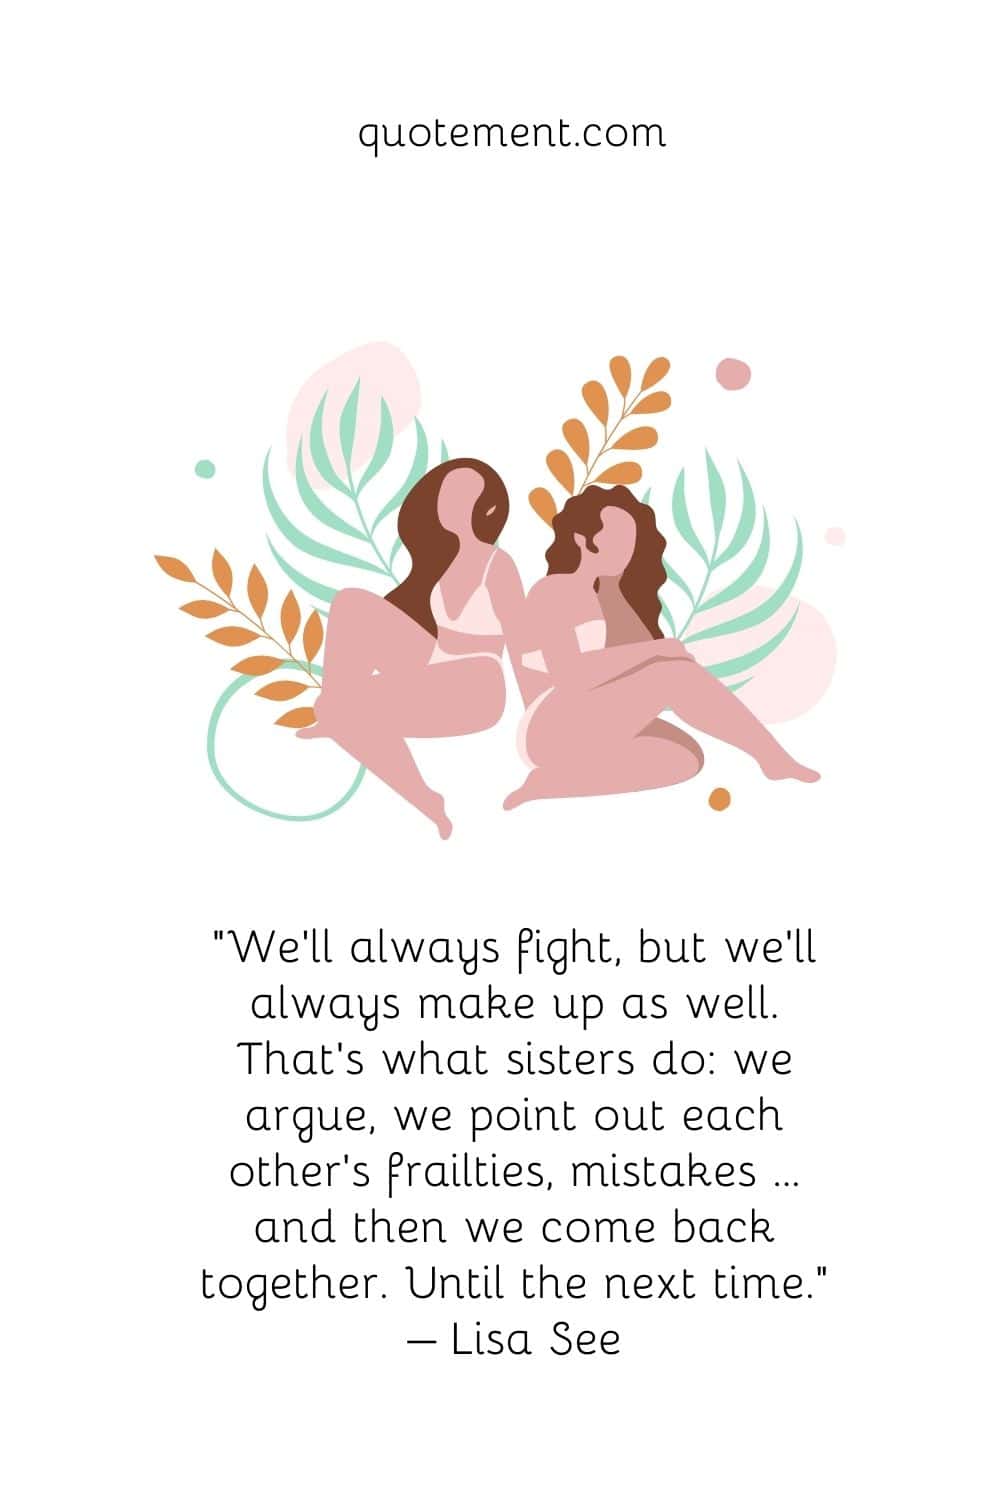 “We’ll always fight, but we’ll always make up as well. That’s what sisters do we argue, we point out each other’s frailties, mistakes .